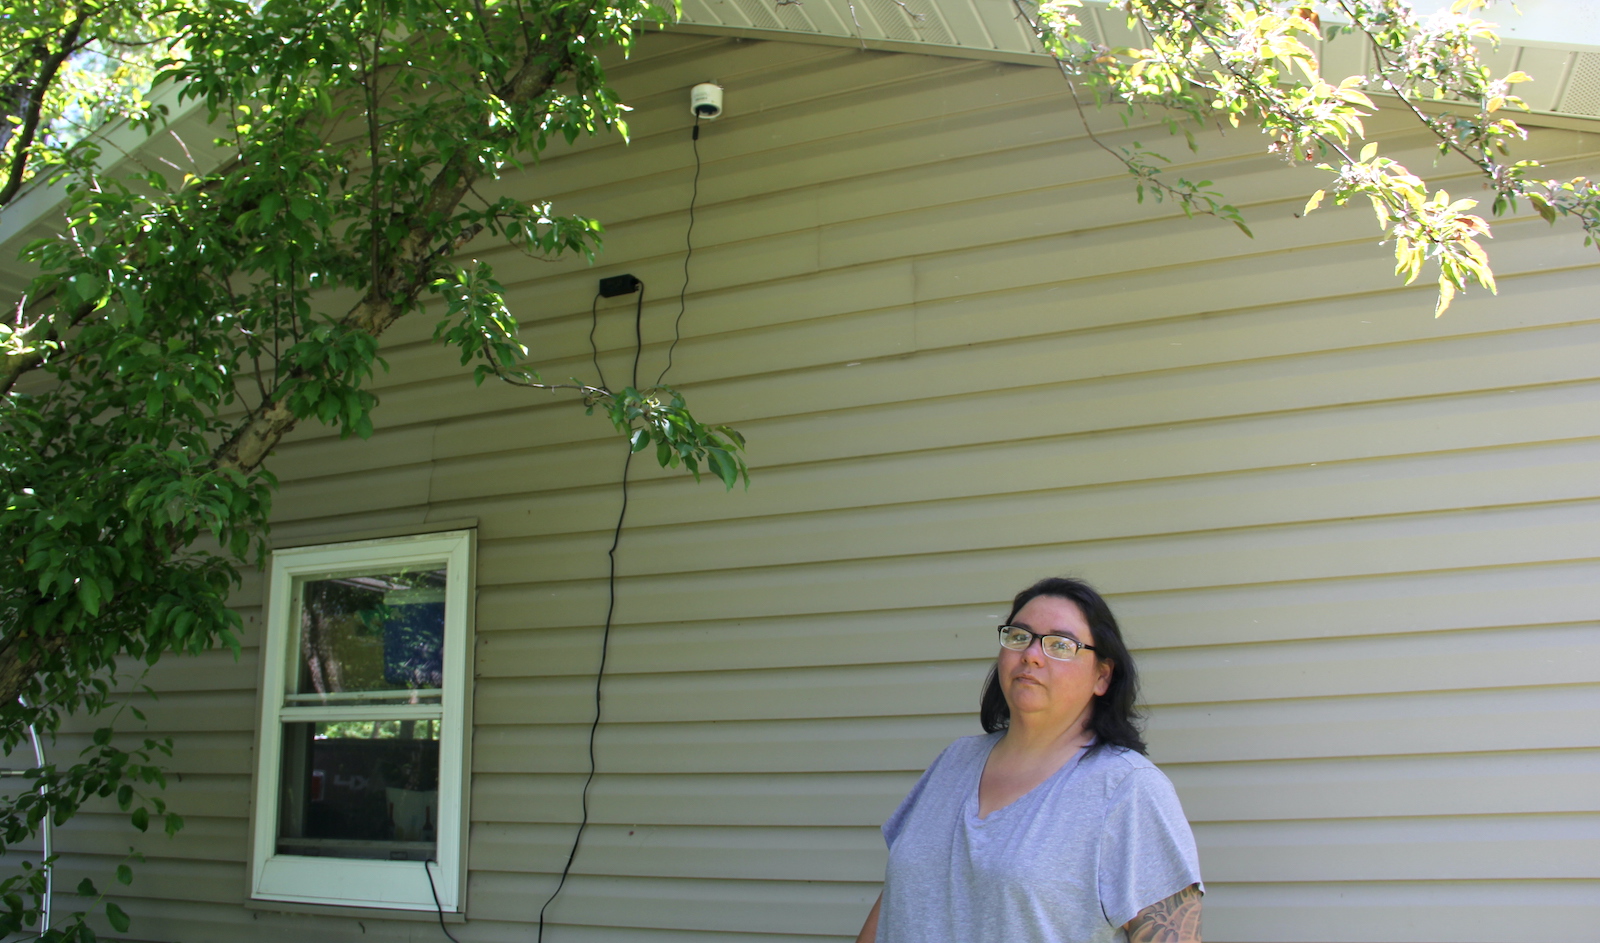 a woman stands underneath a white cannister attached to a house